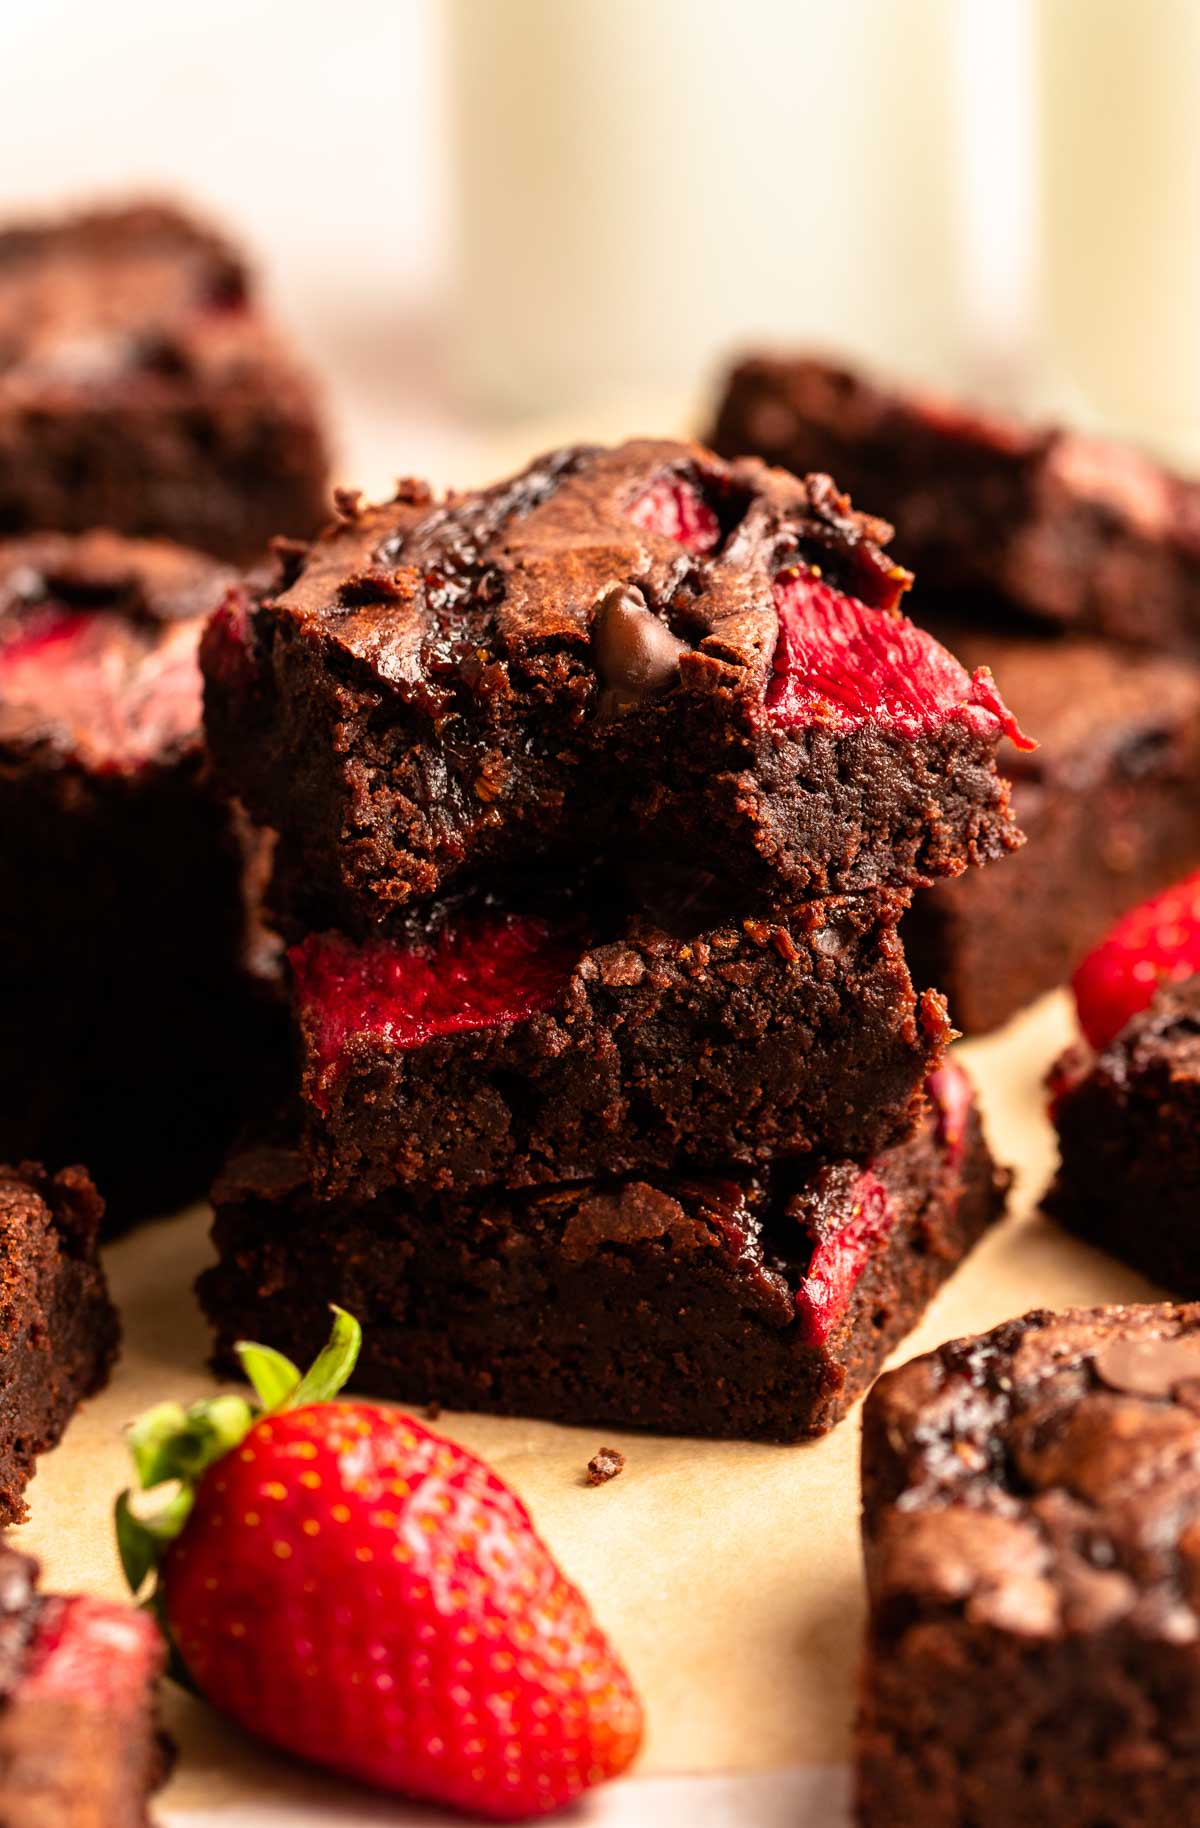 Stack of strawberry brownies with the top one missing a bite.